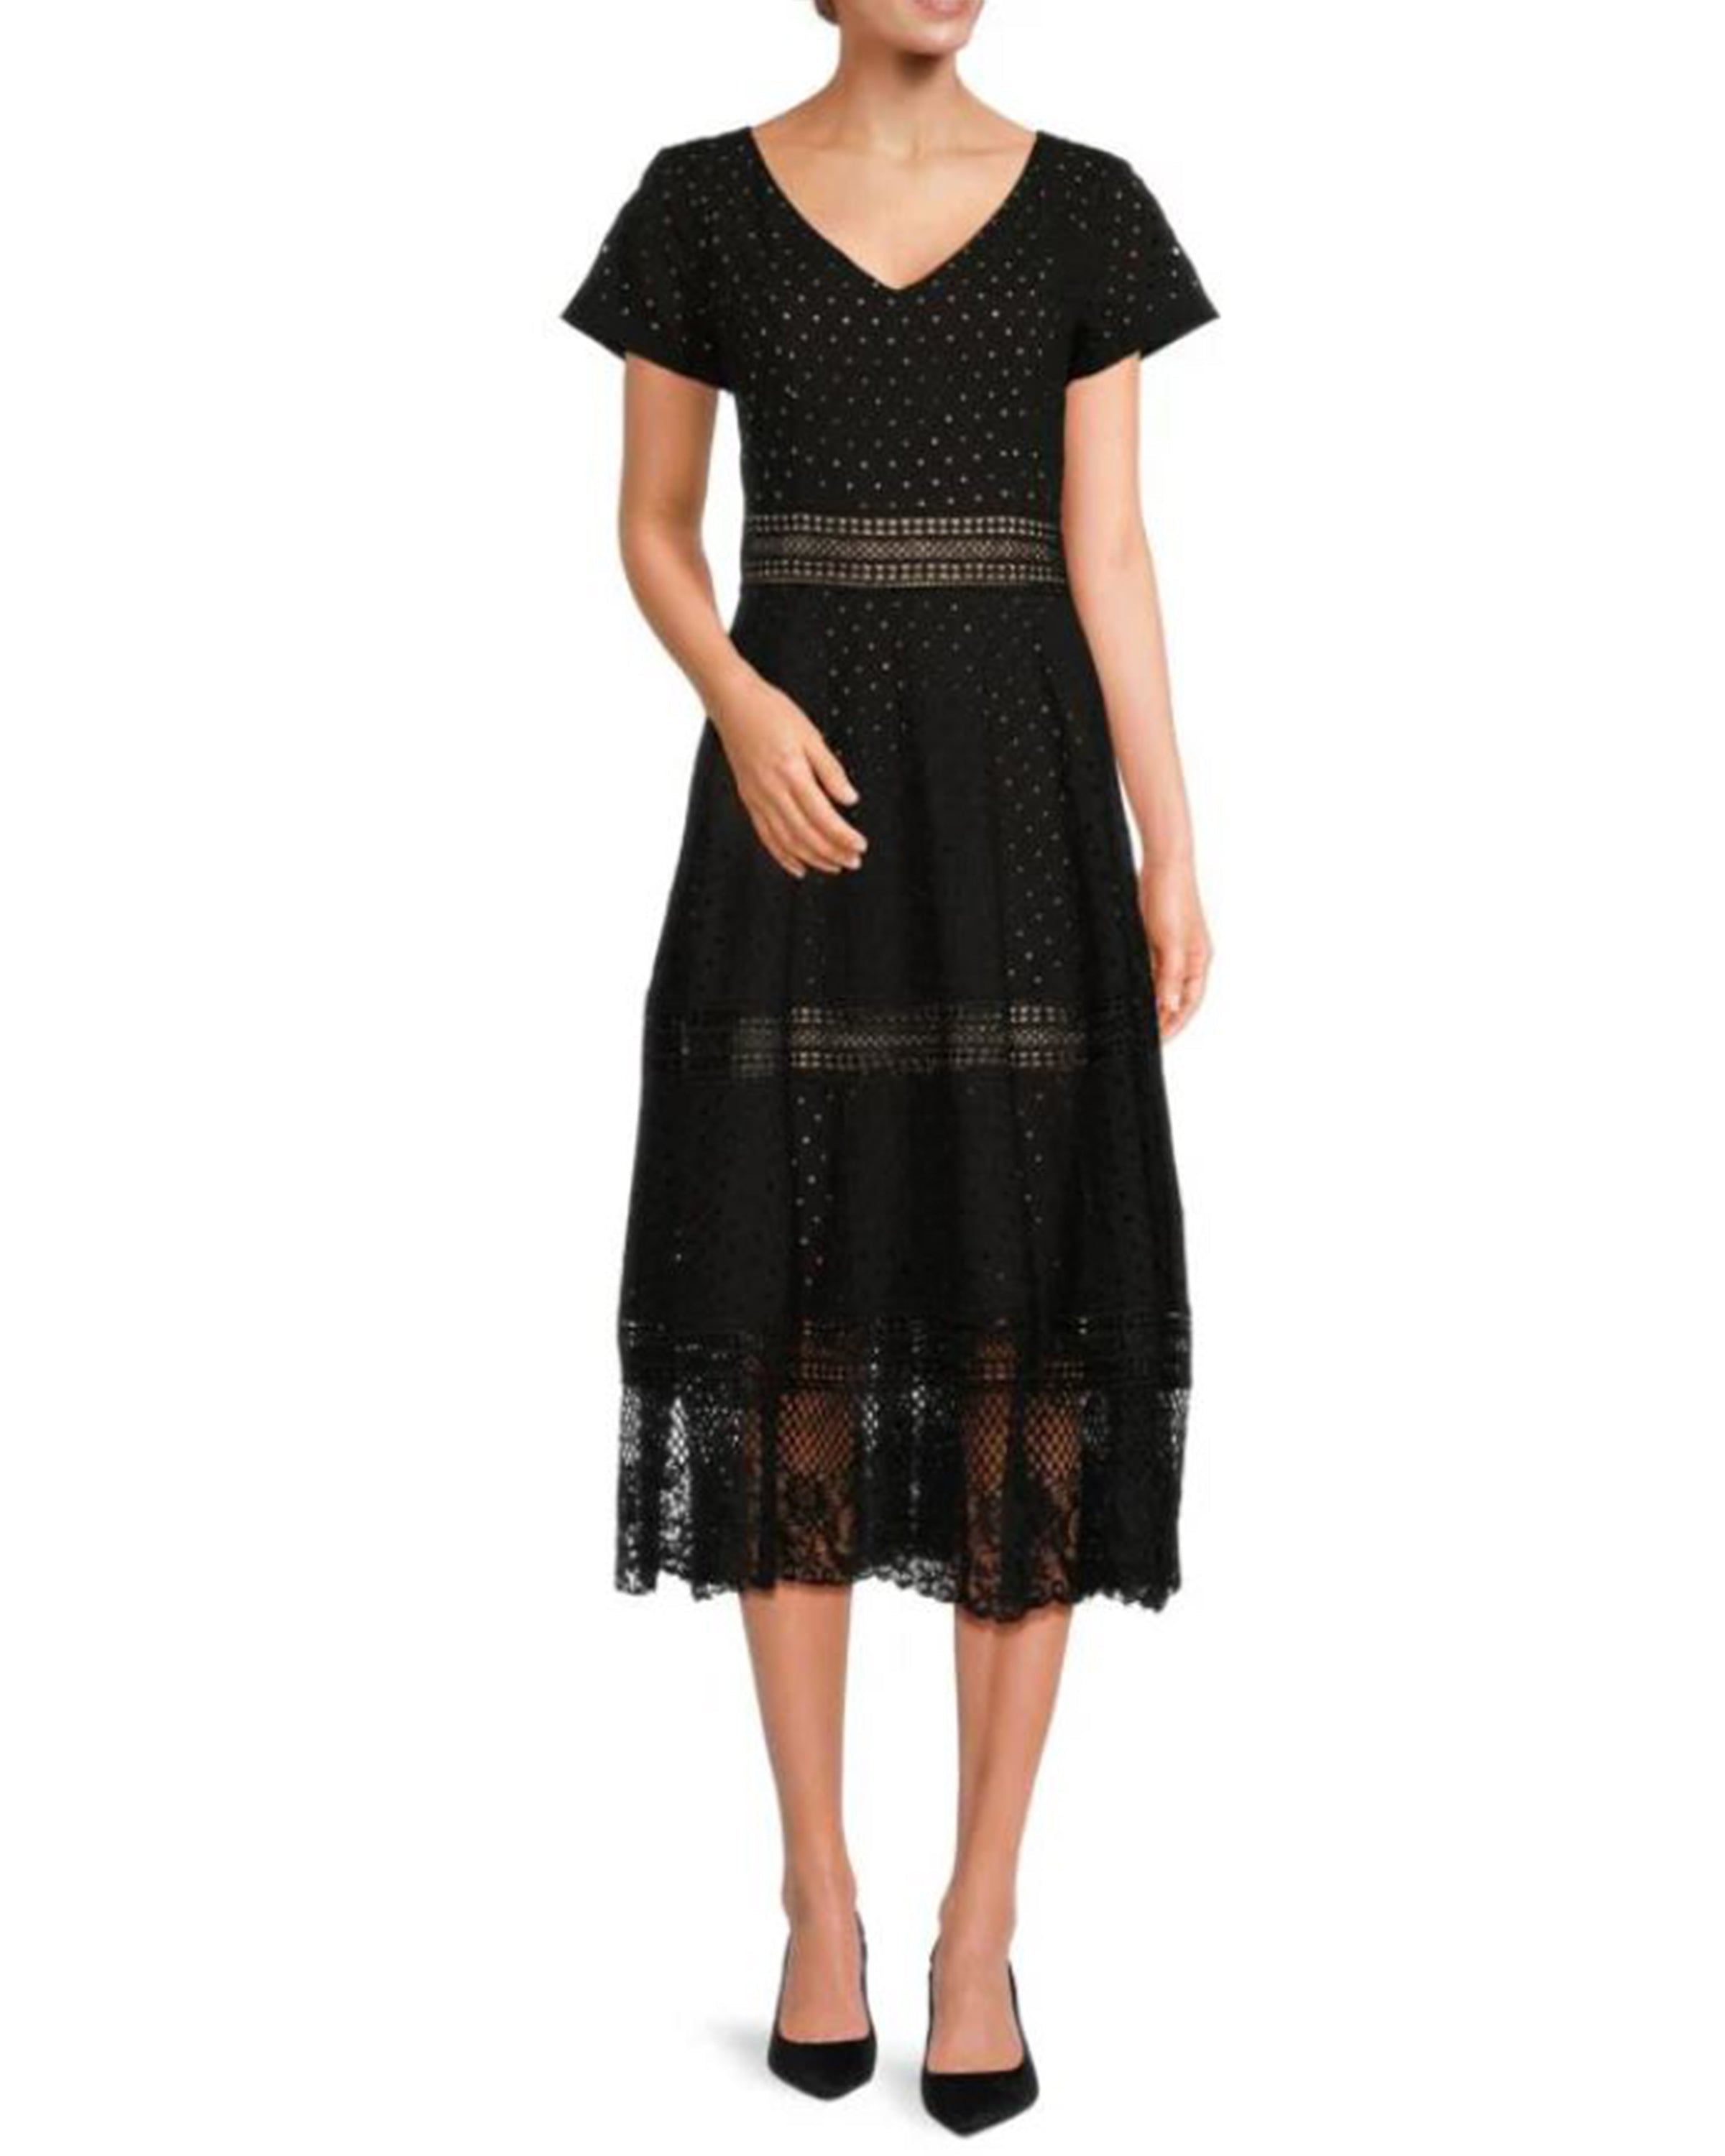 FOCUS by SHANI - Eyelet Embroidered Midi Dress in Black